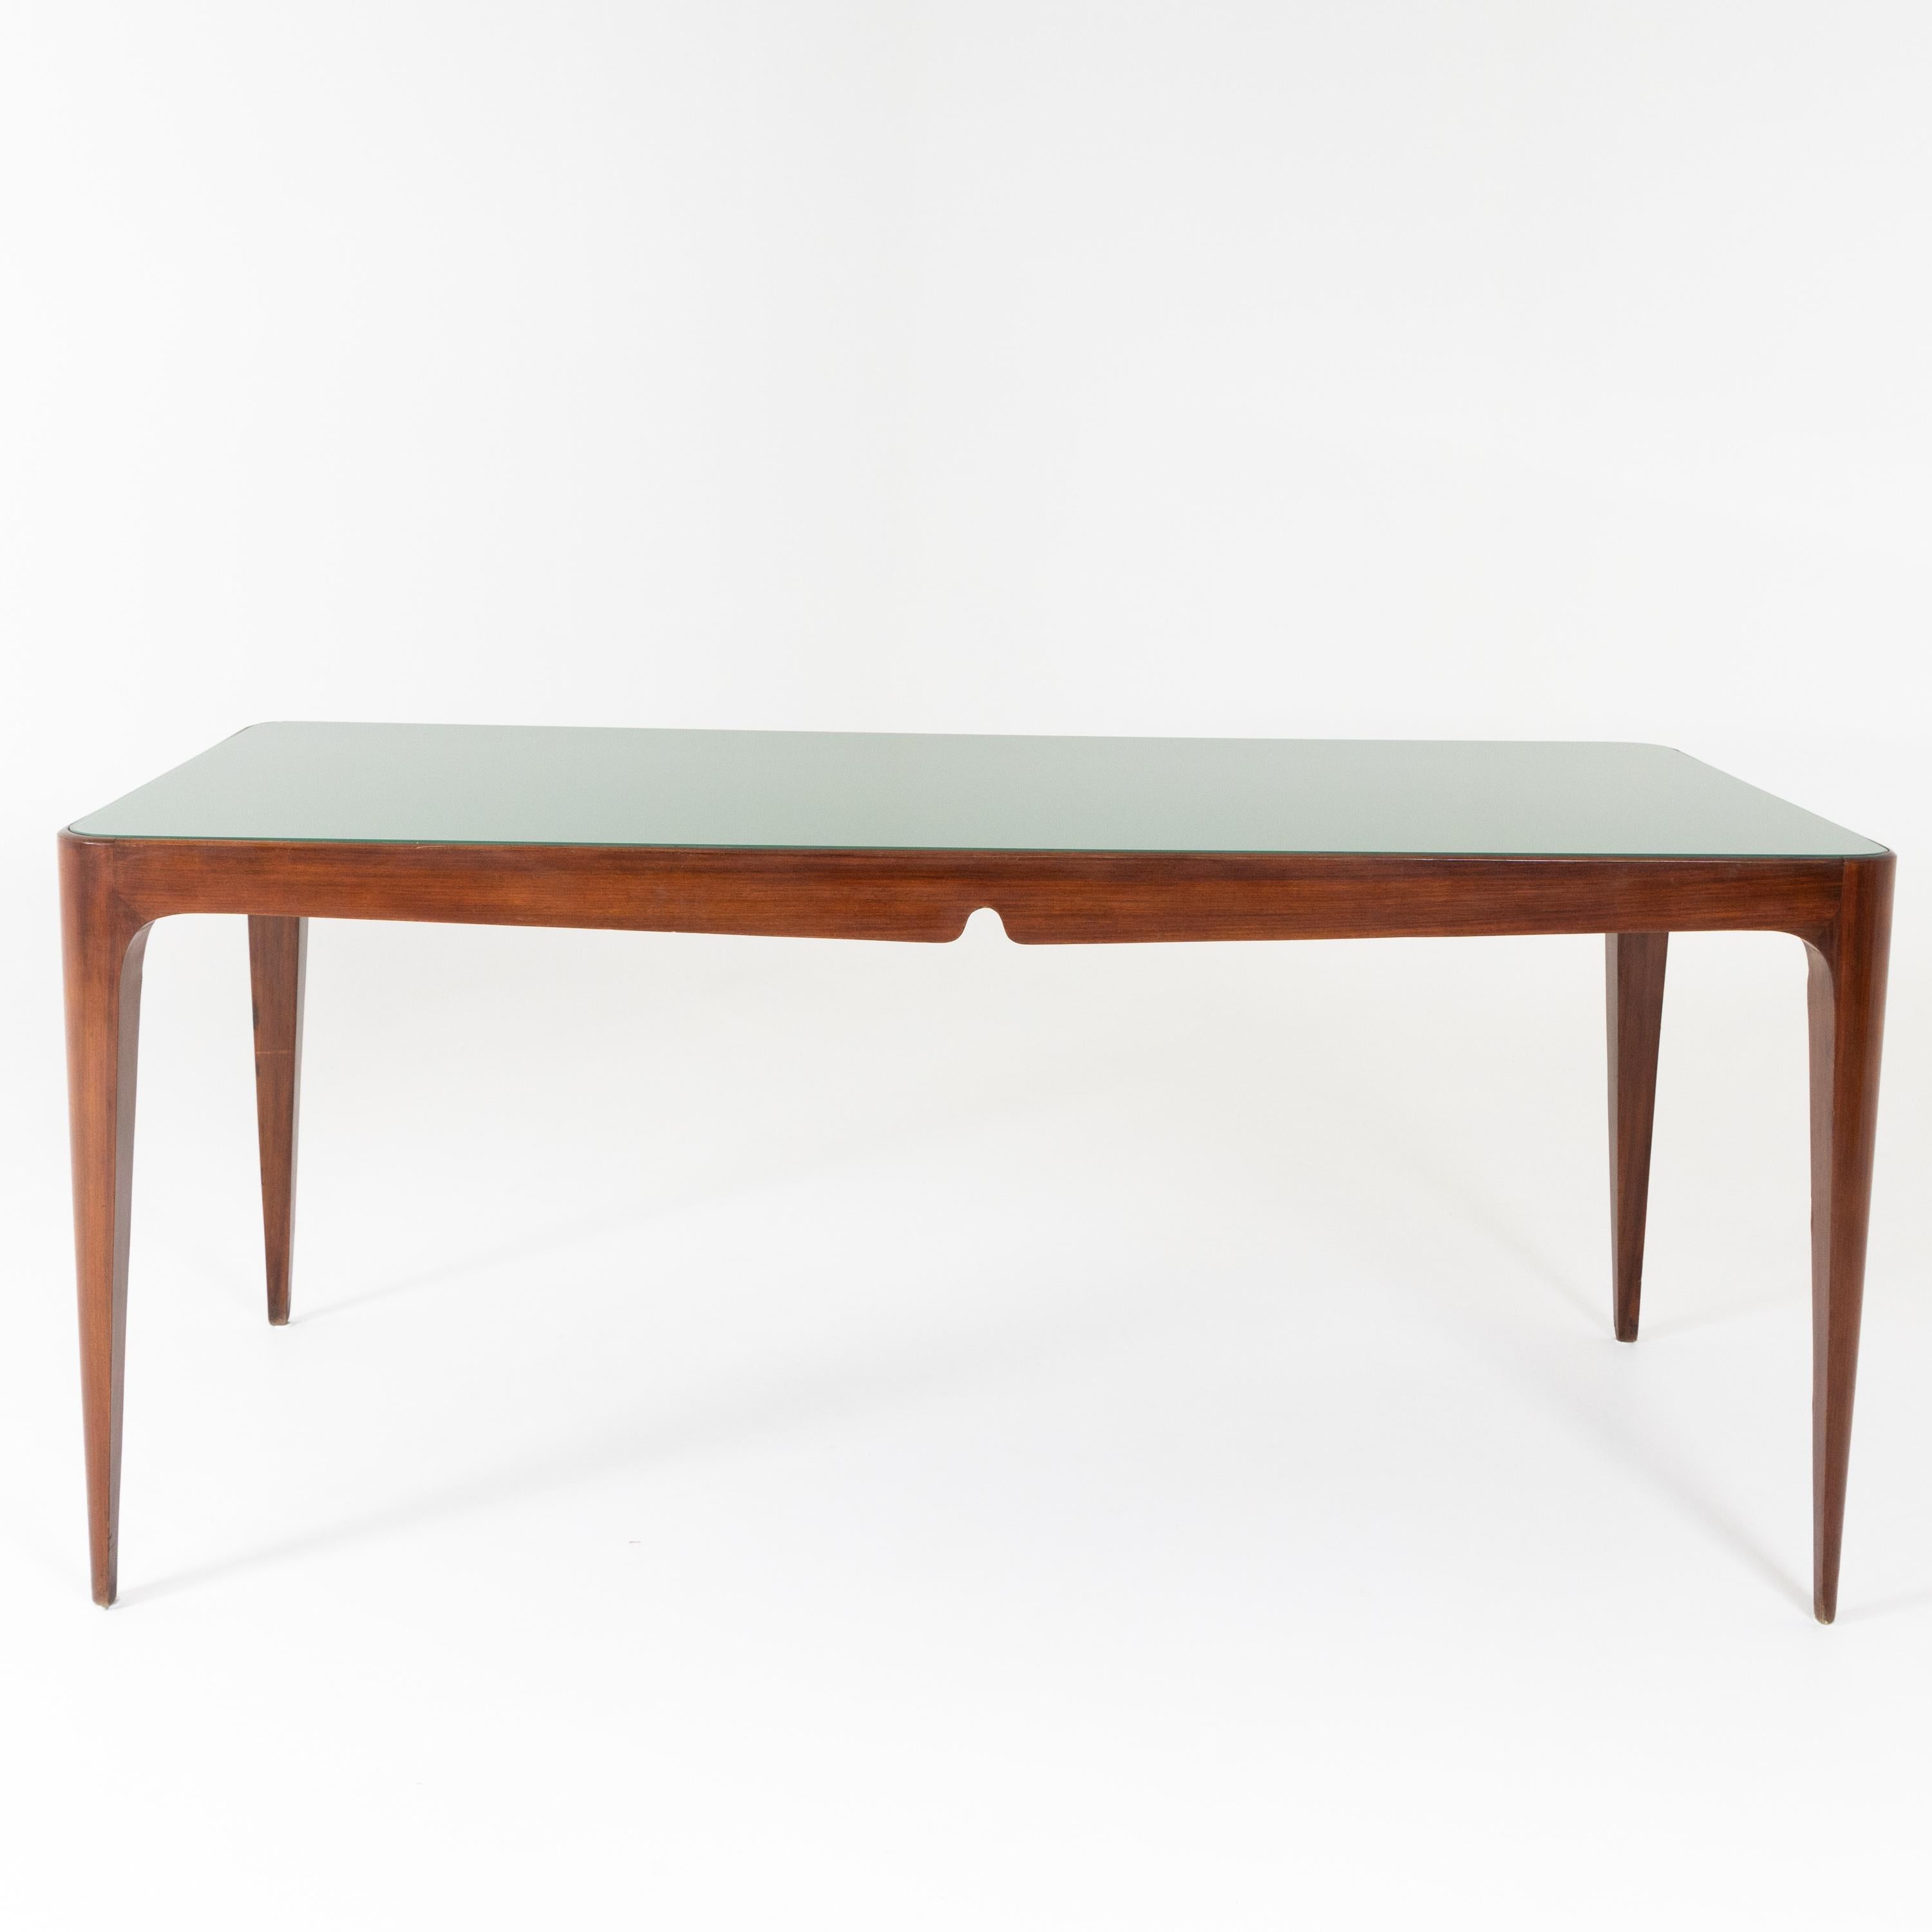 Large dining table with elegantly curved frame and conical pointed legs and green glass top.
 